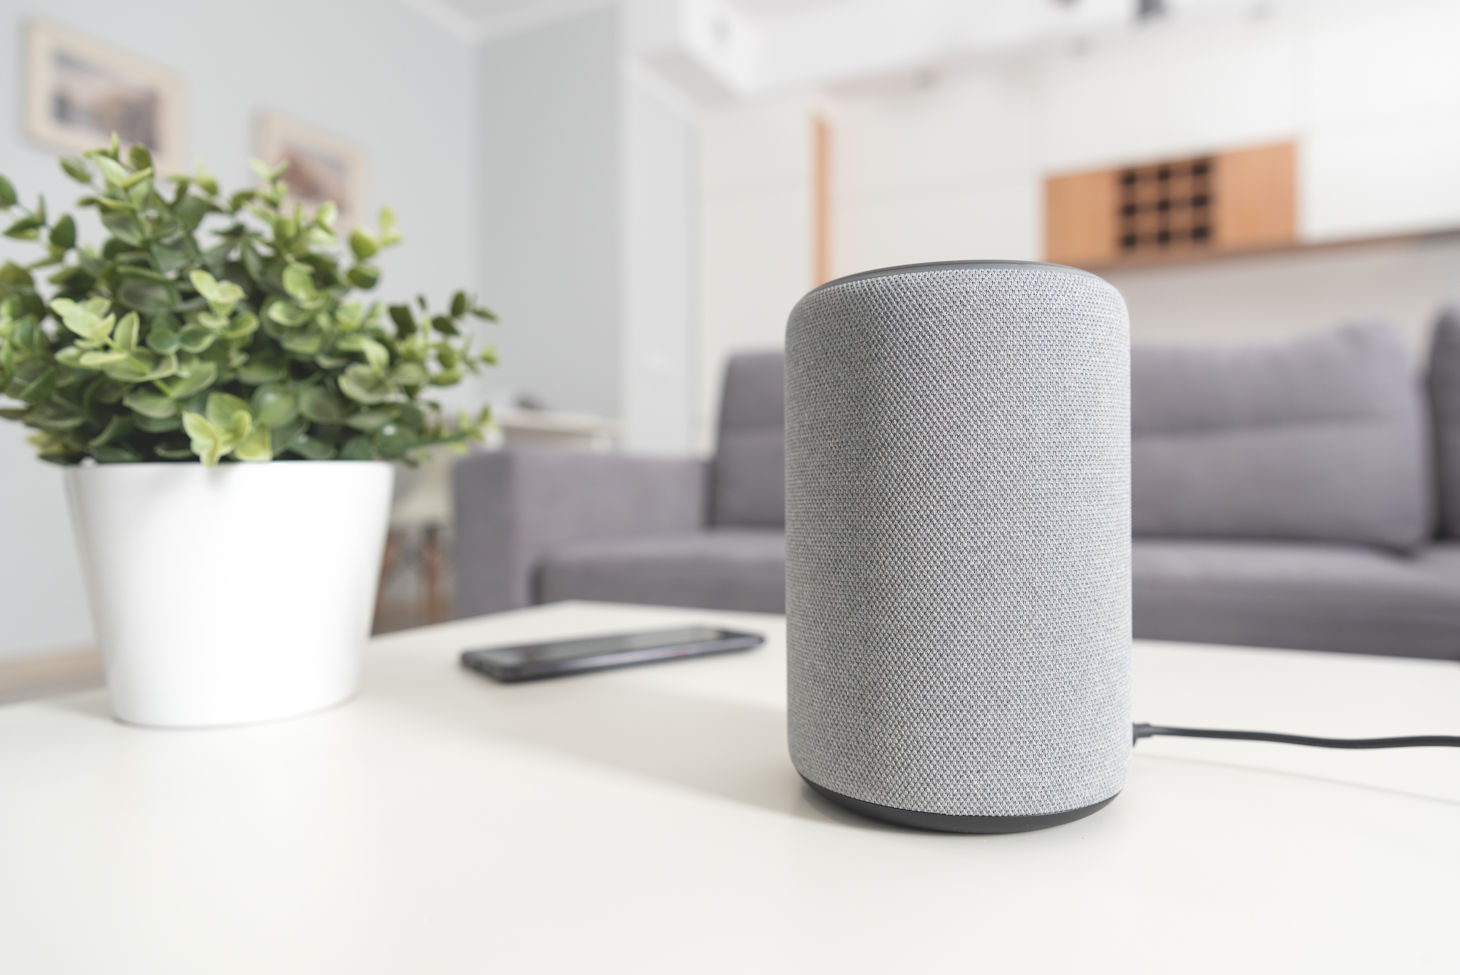 Optimizing Your Marketing Strategy for Smart Speakers and Voice Search Assistants